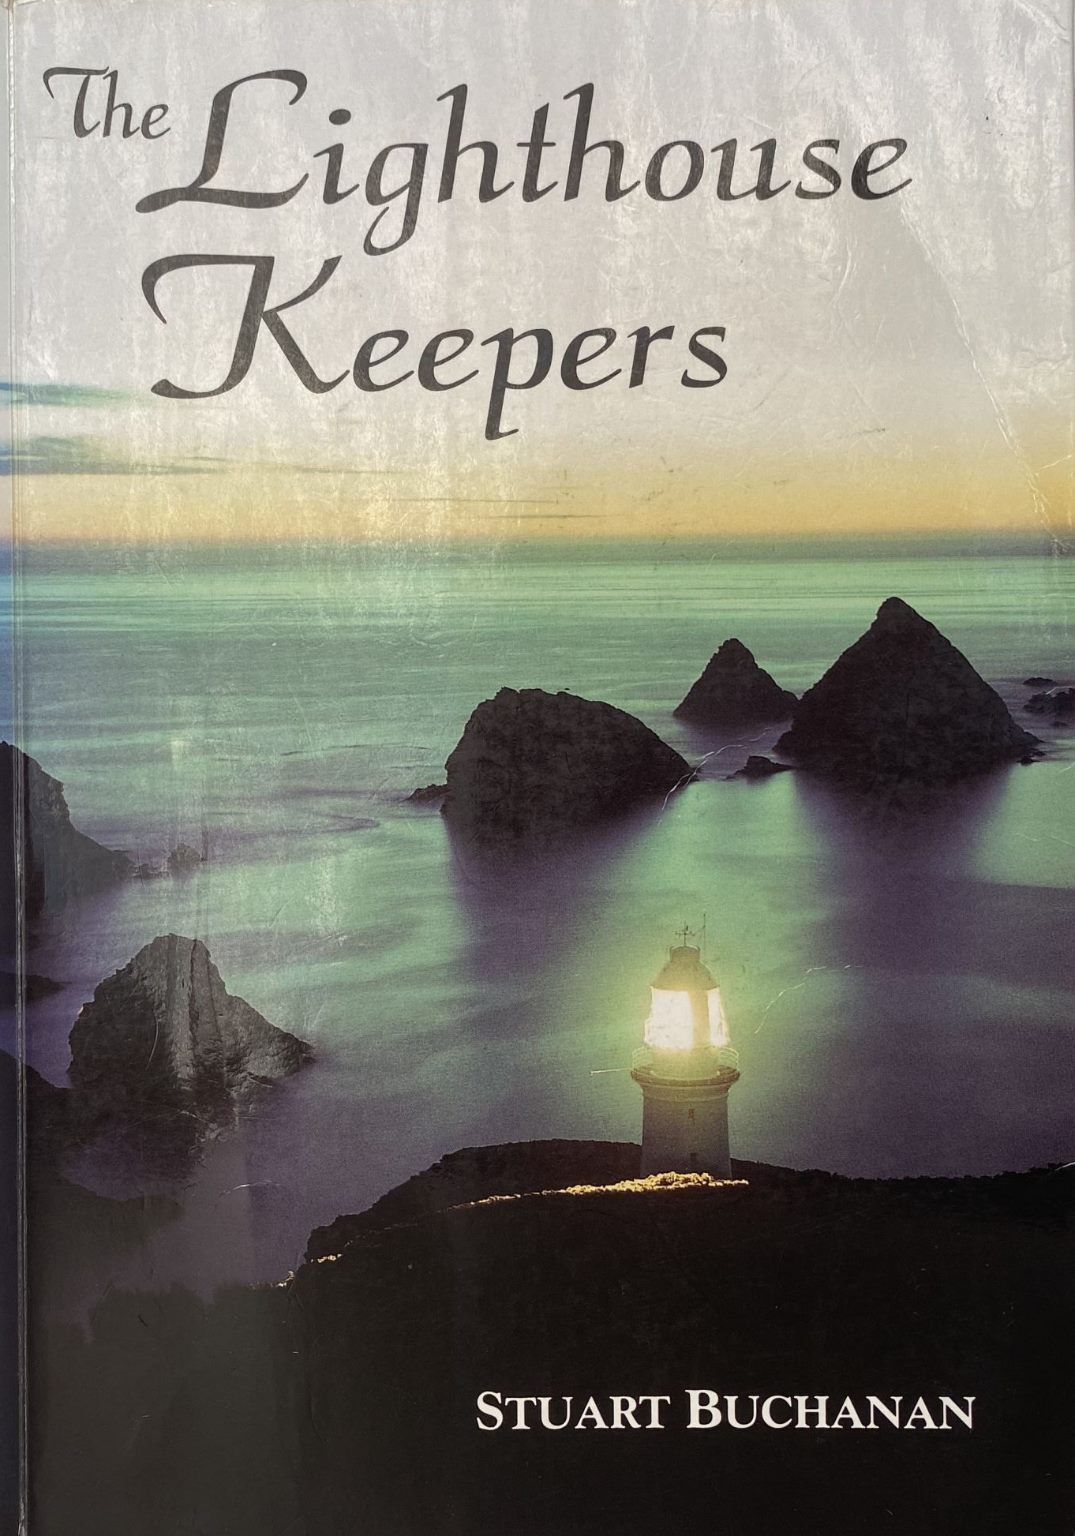 The Lighthouse Keepers